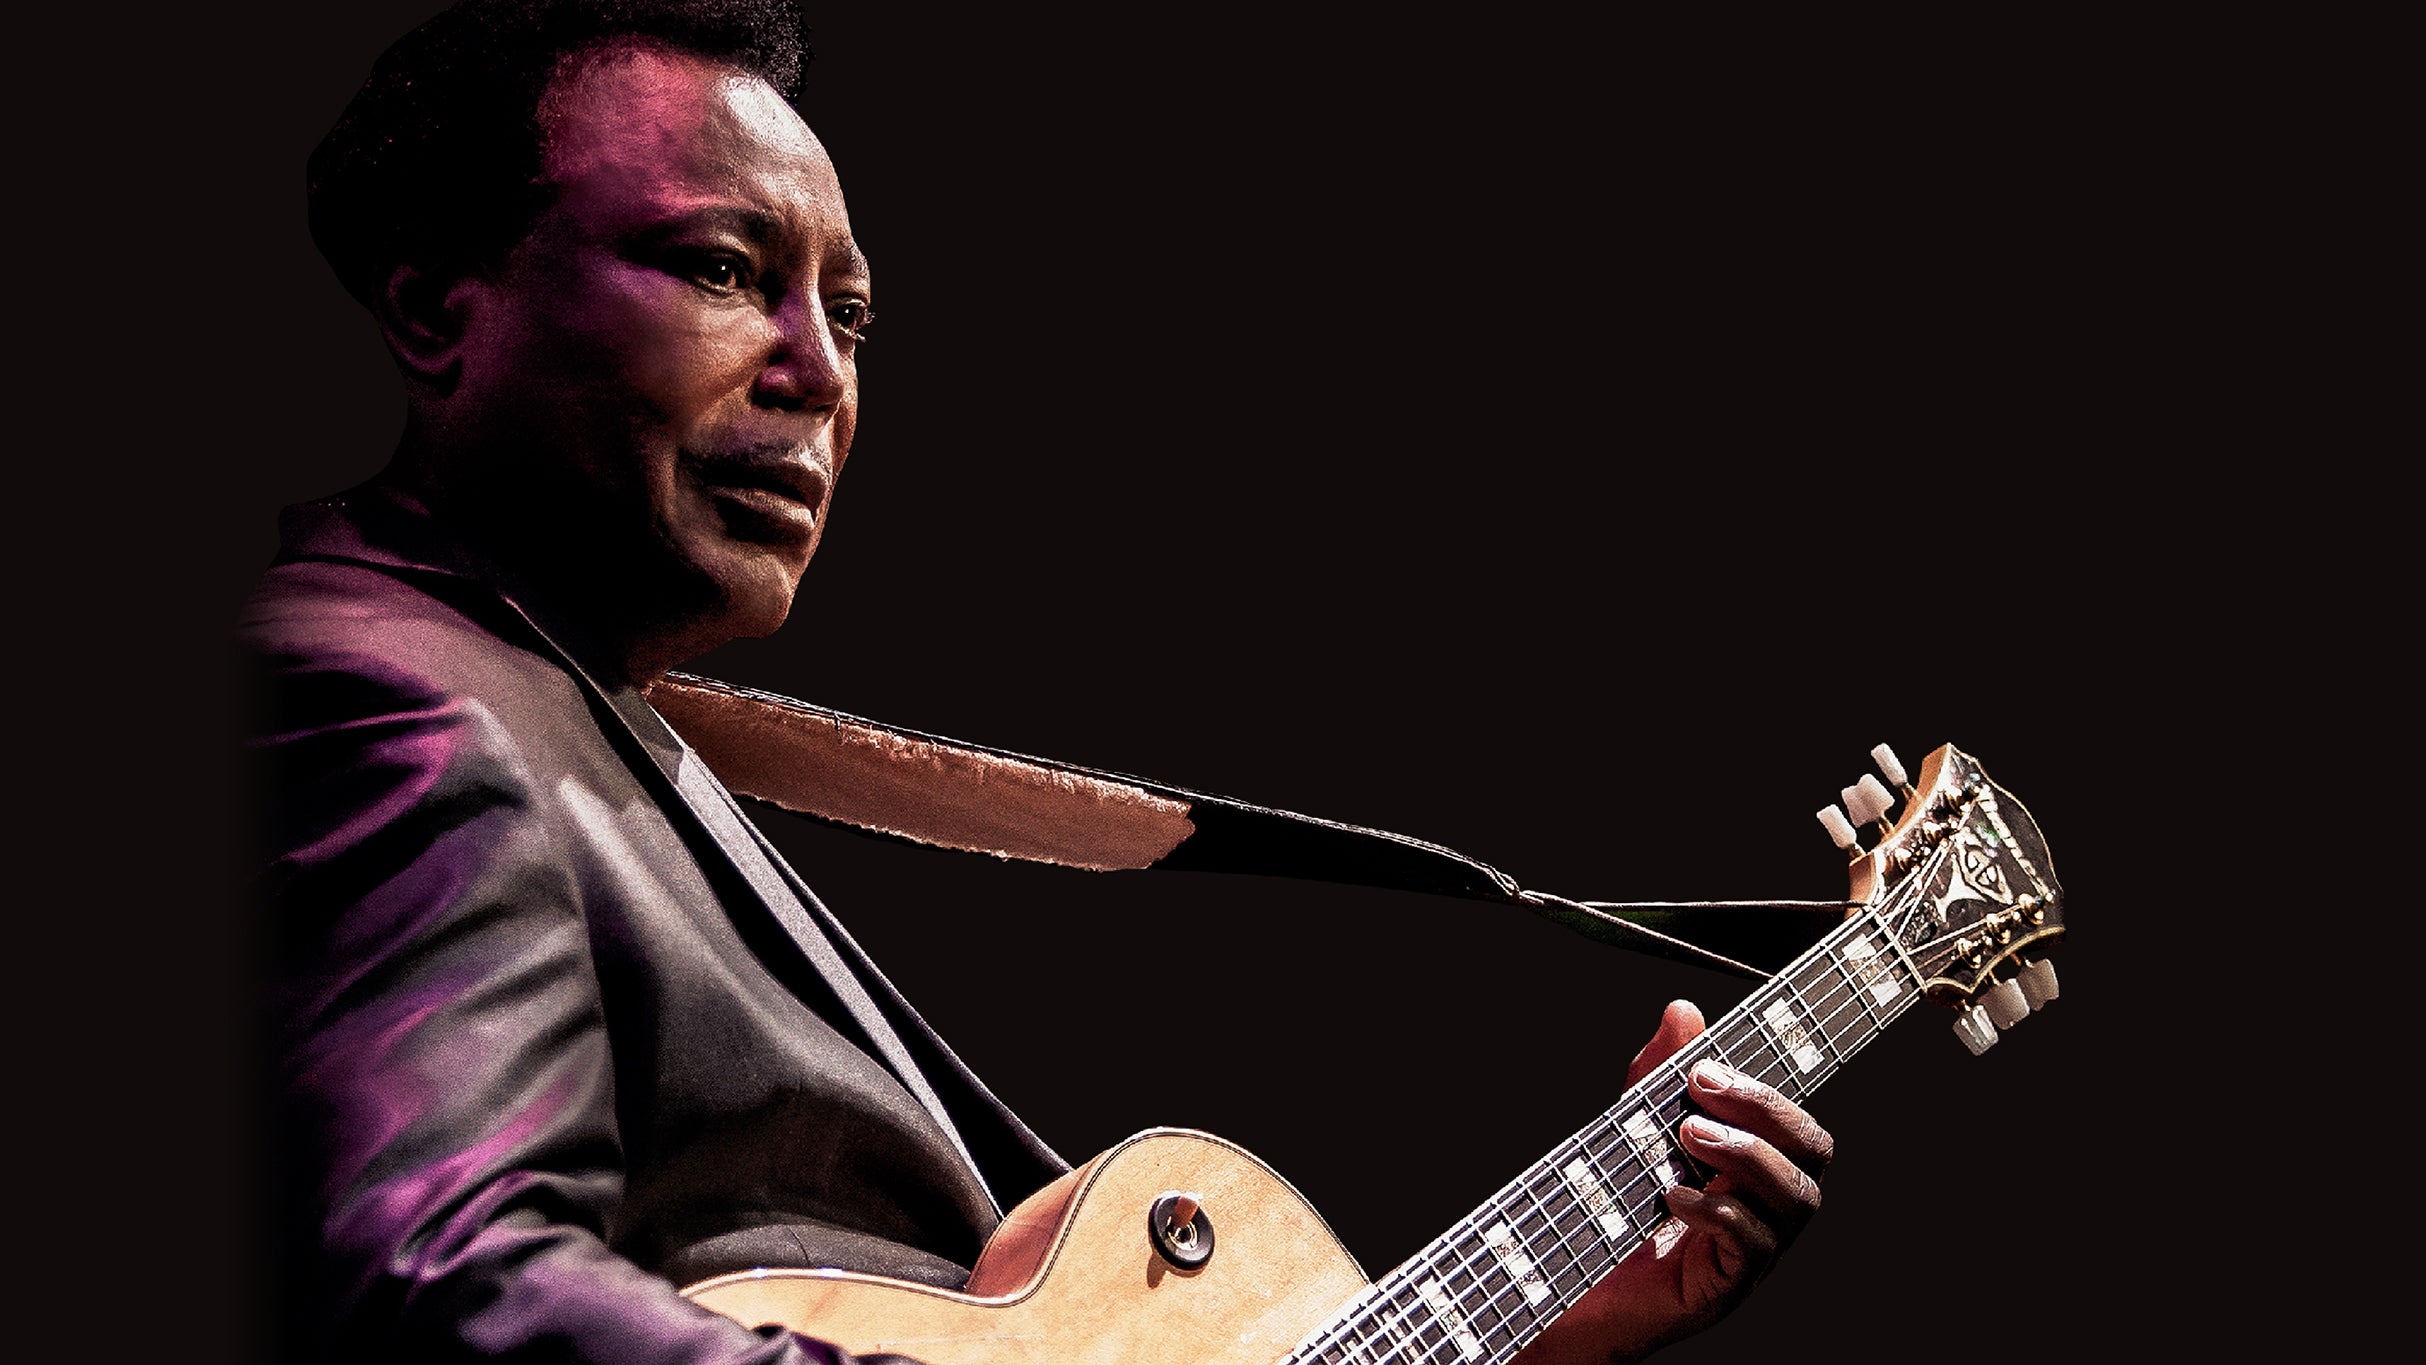 TD Toronto Jazz Fest presents George Benson free pre-sale pasword for early tickets in Toronto